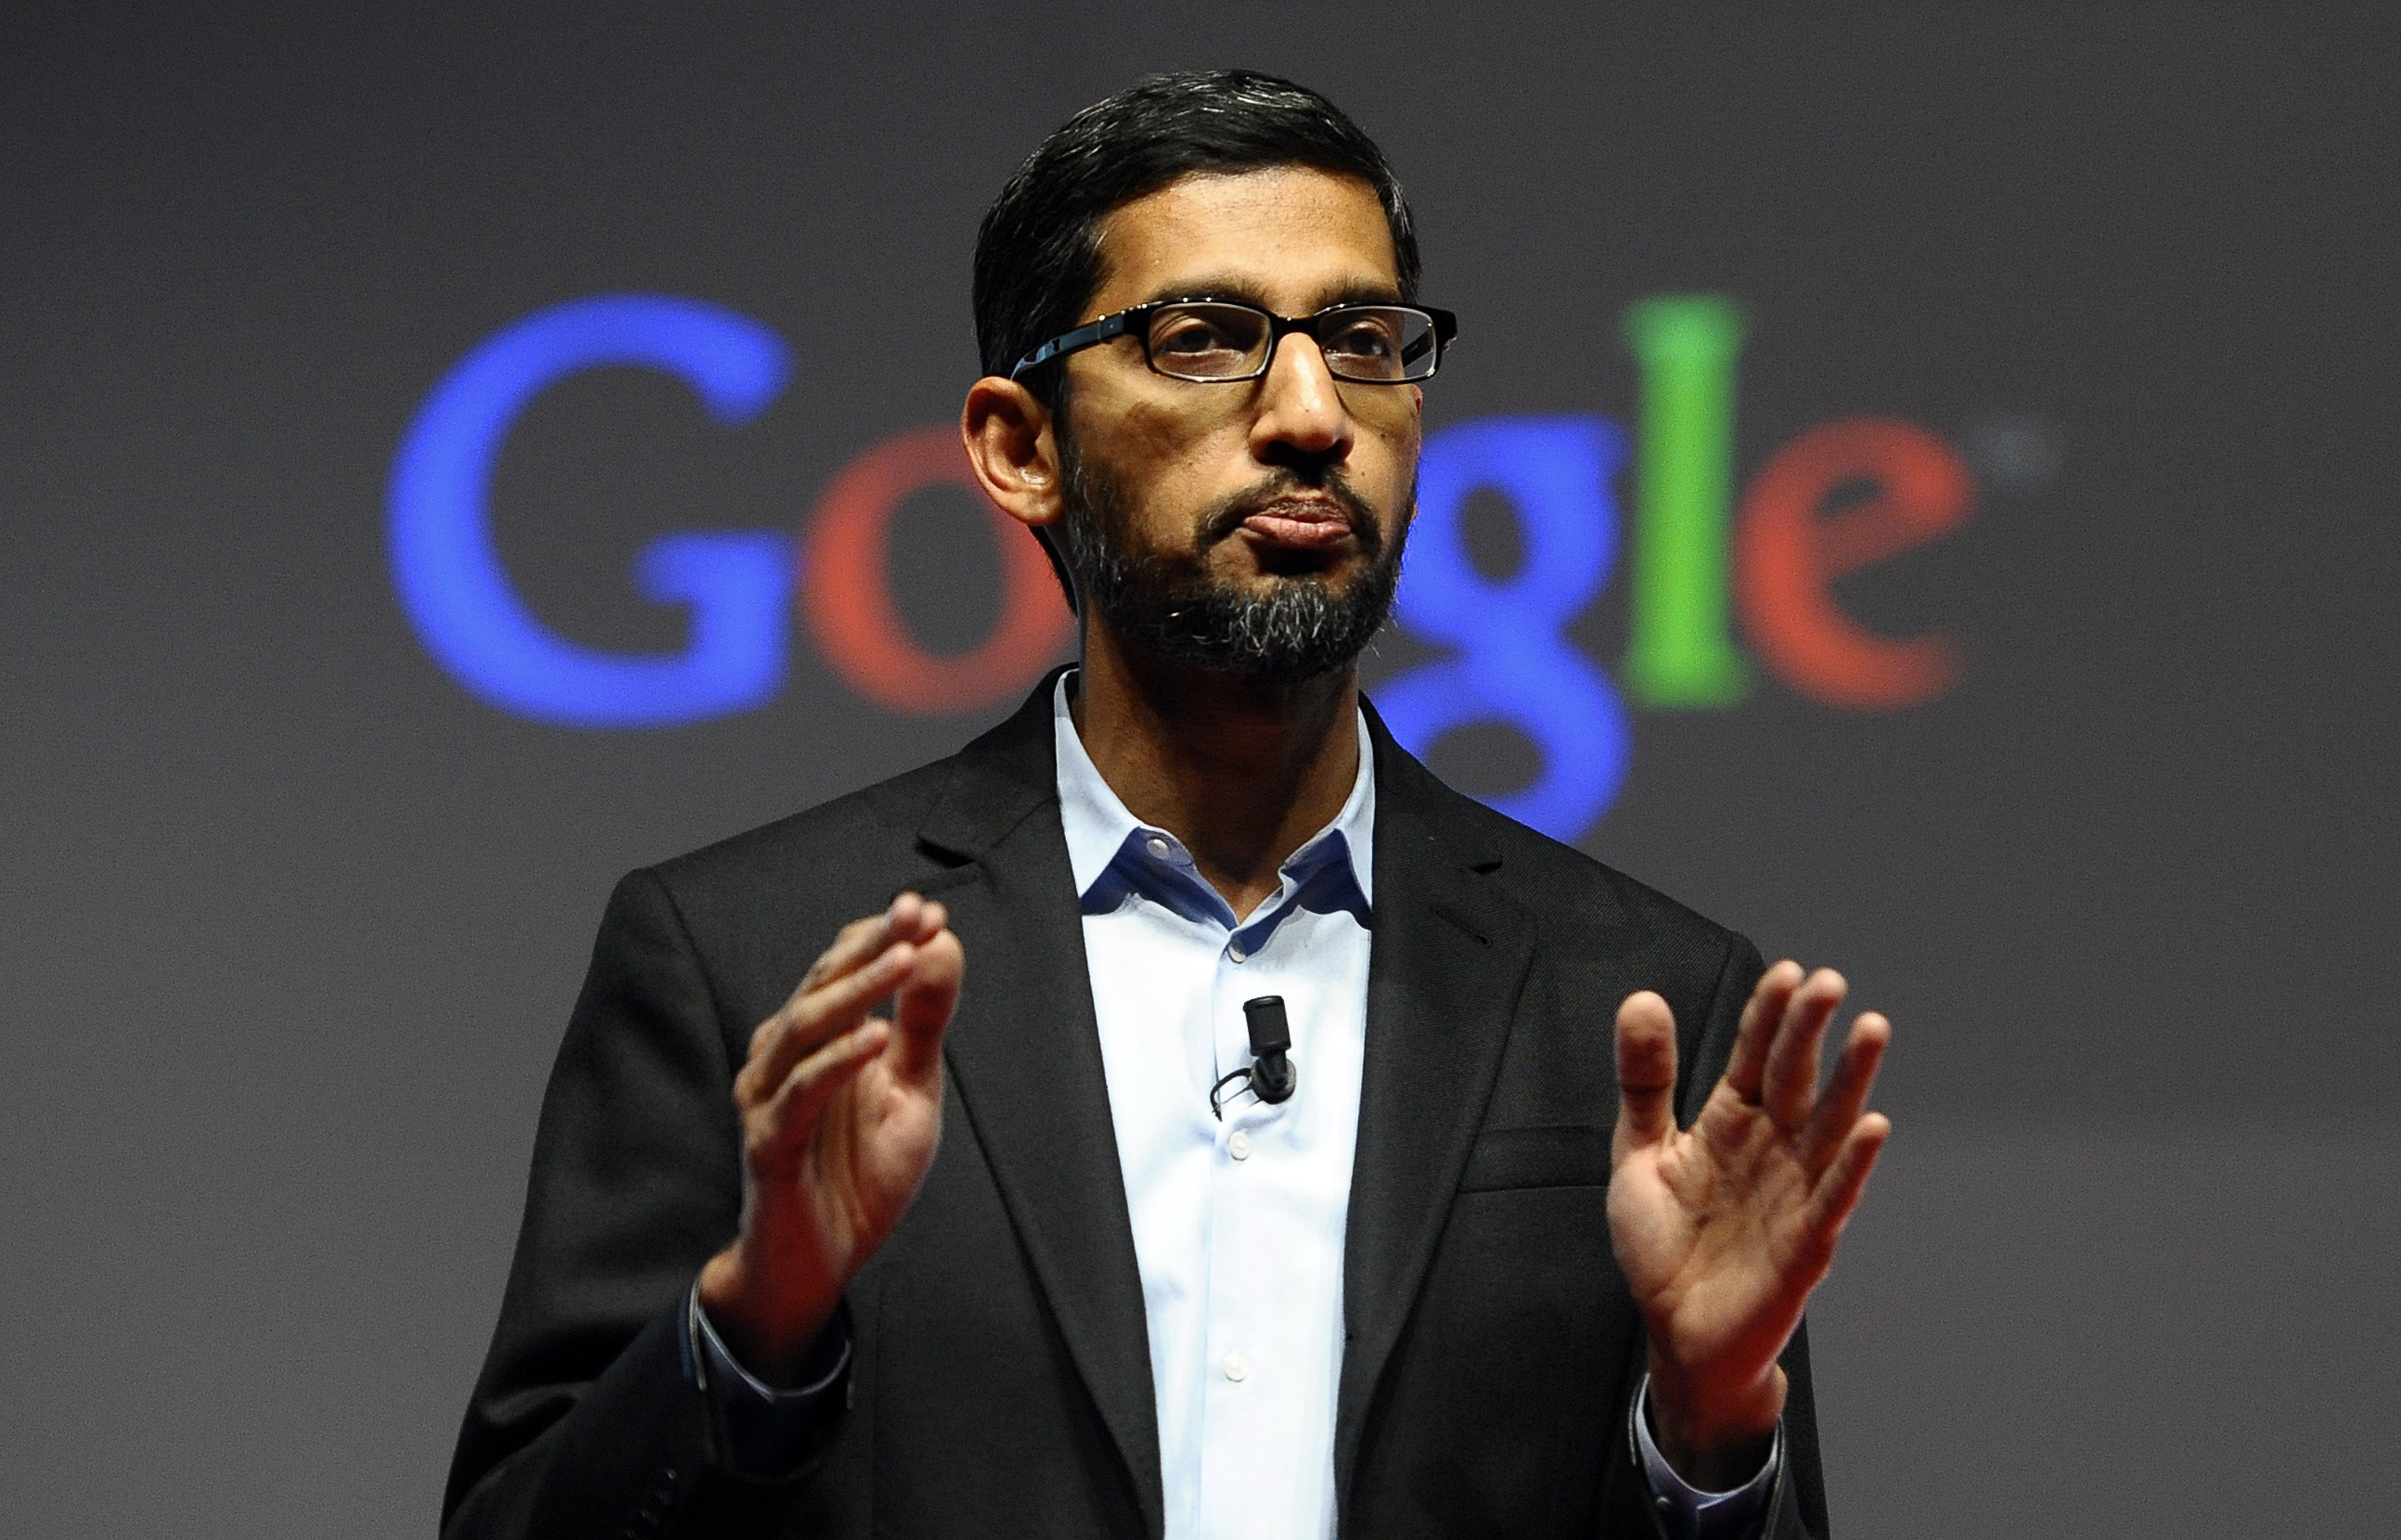 Google to Enhance Search Engine With ChatAI, CEO says